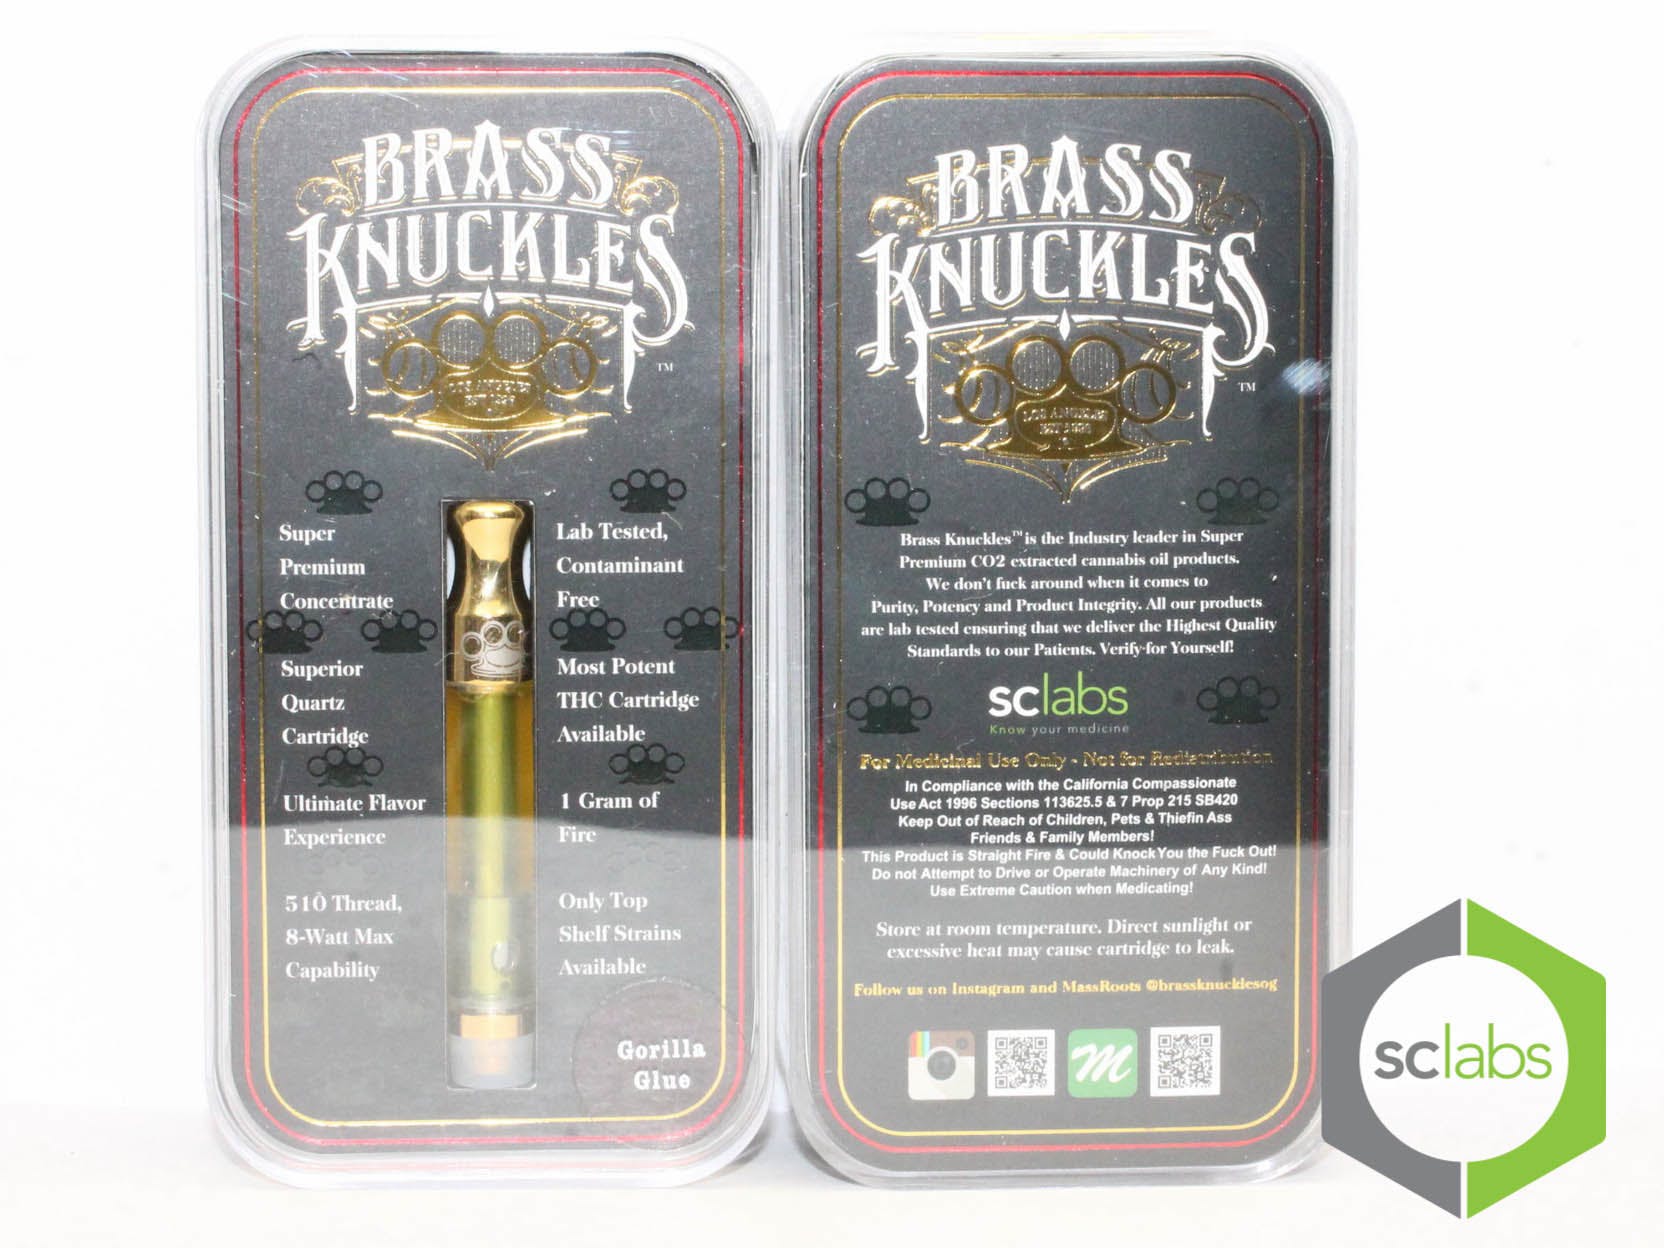 concentrate-brass-knuckles-brassknuckles-girl-scout-cookies